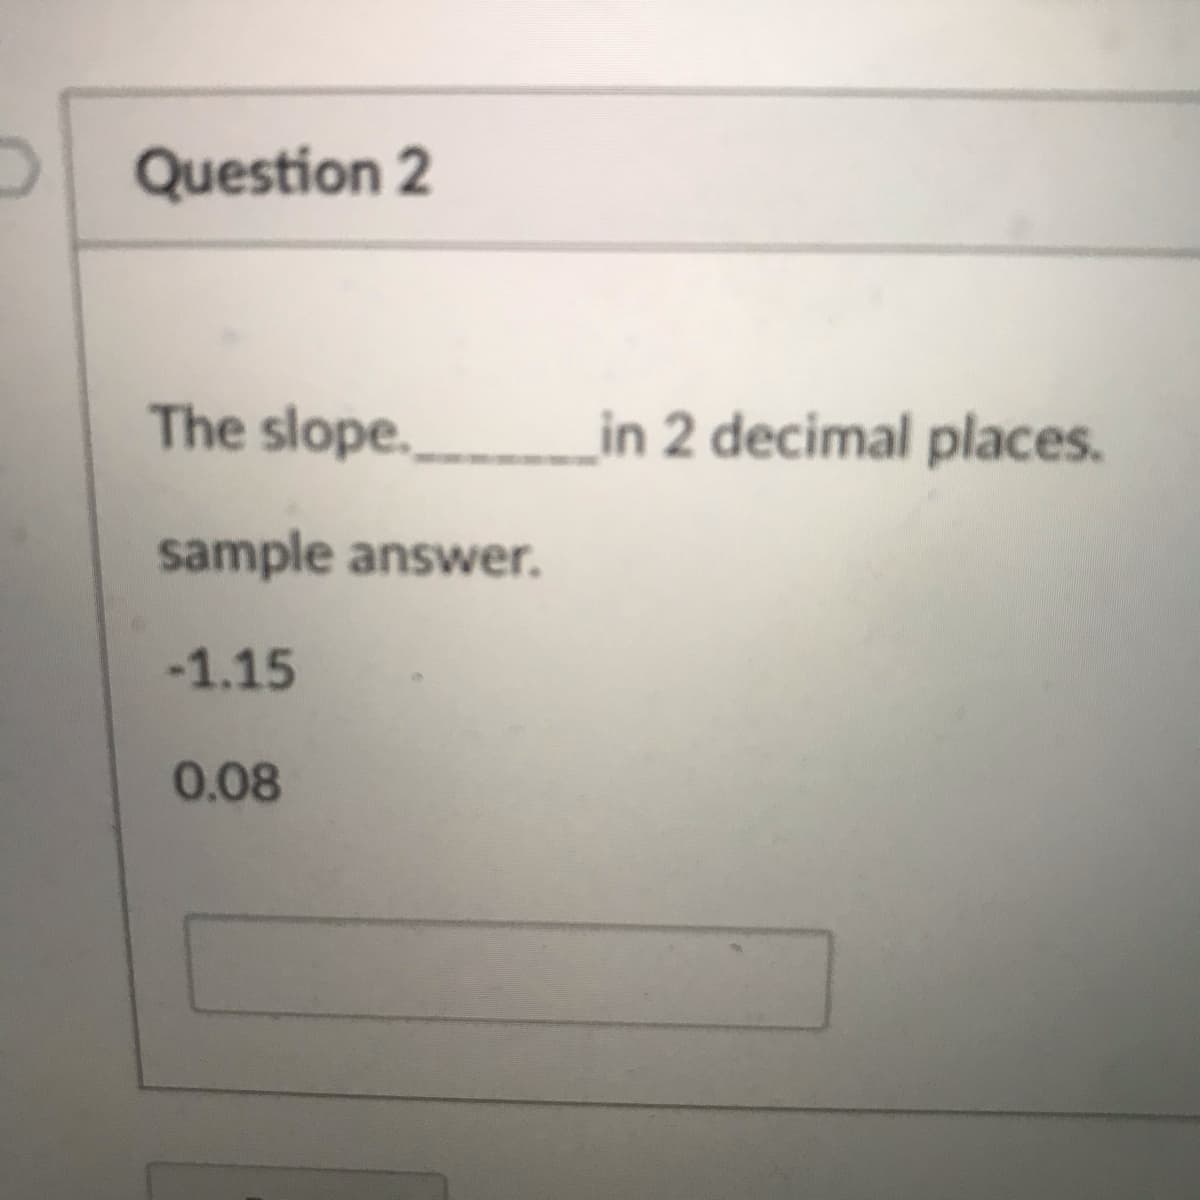 O Question 2
The slope._________in 2 decimal places.
sample answer.
-1.15
0.08